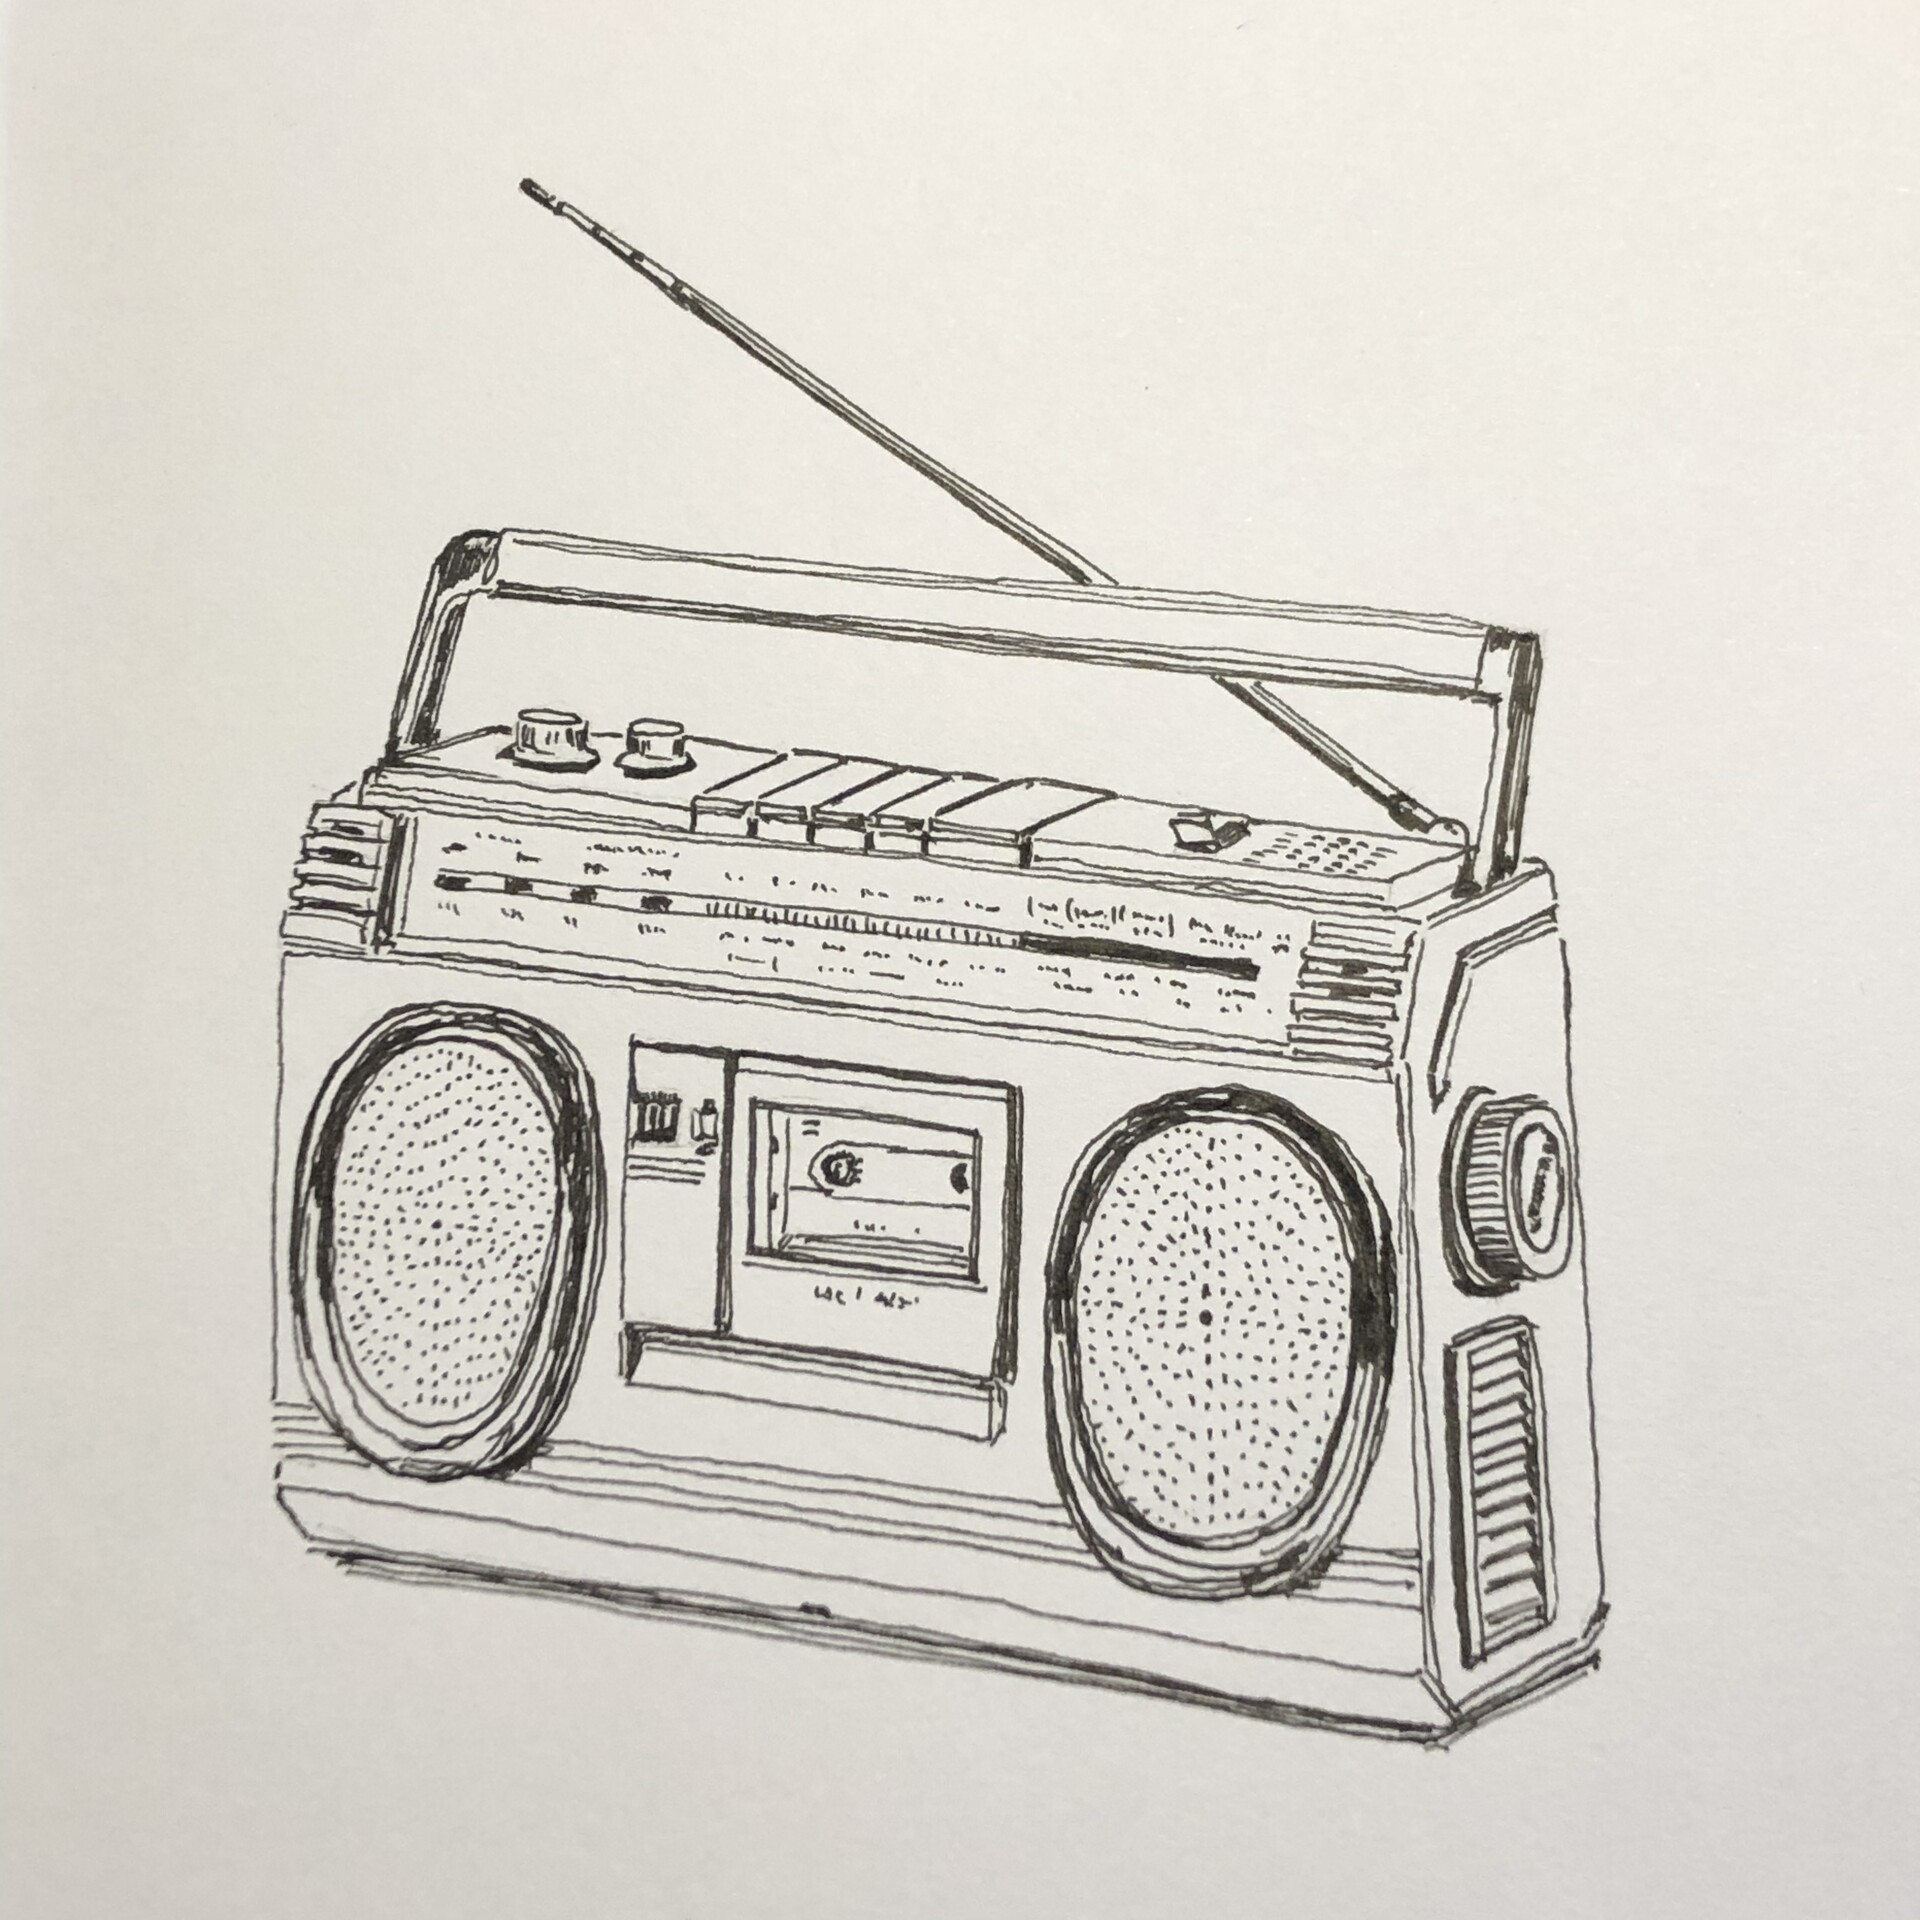 Radio Drawing - How To Draw A Radio Step By Step